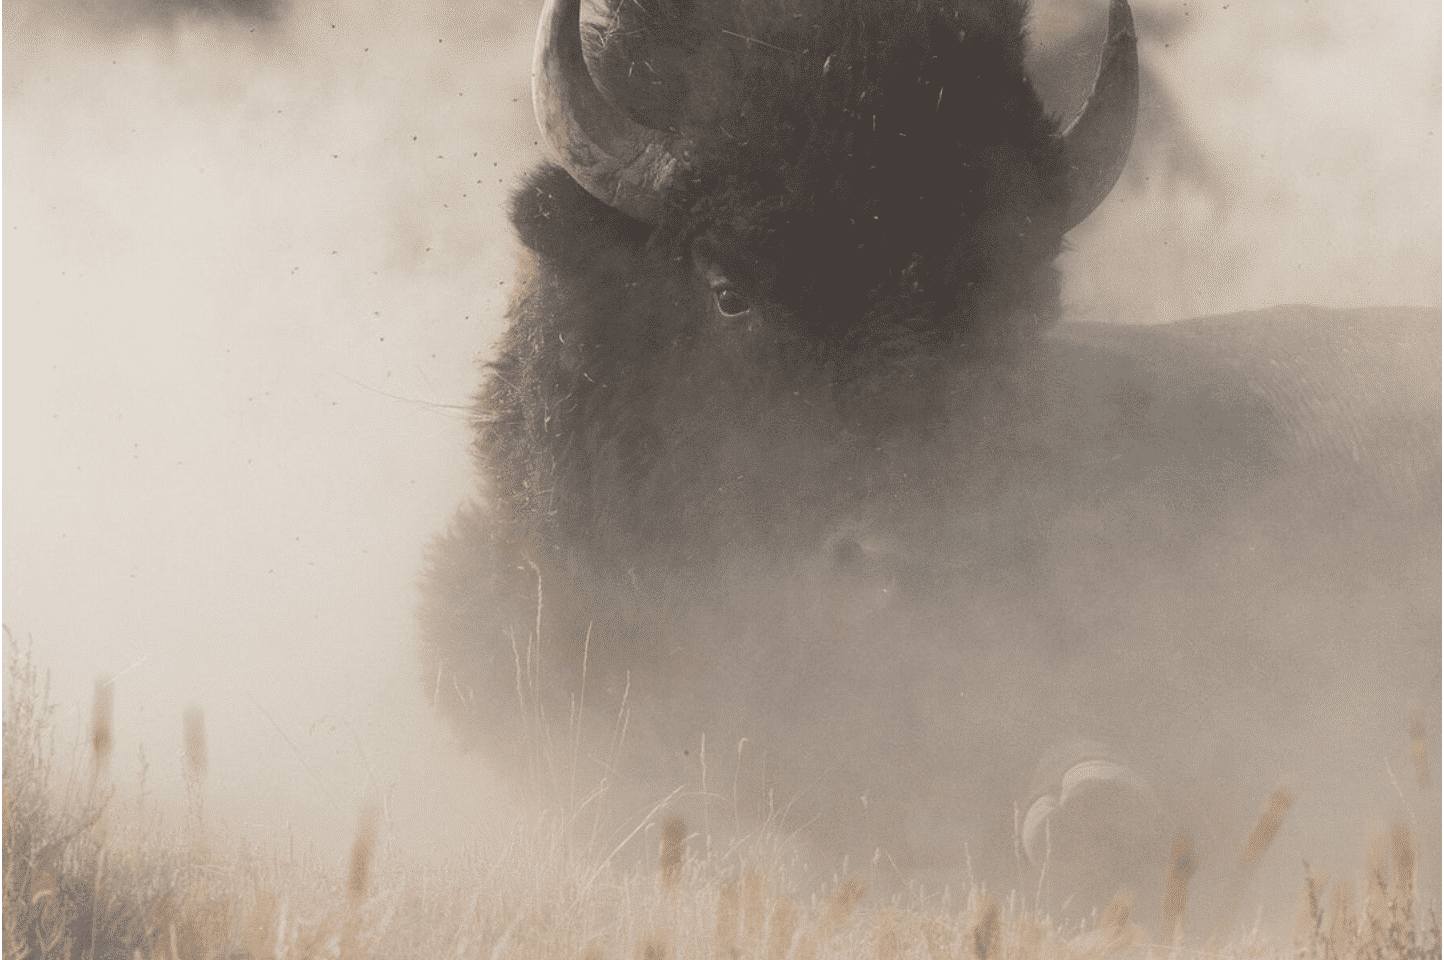 A close up of a bison's head in a dust cloud